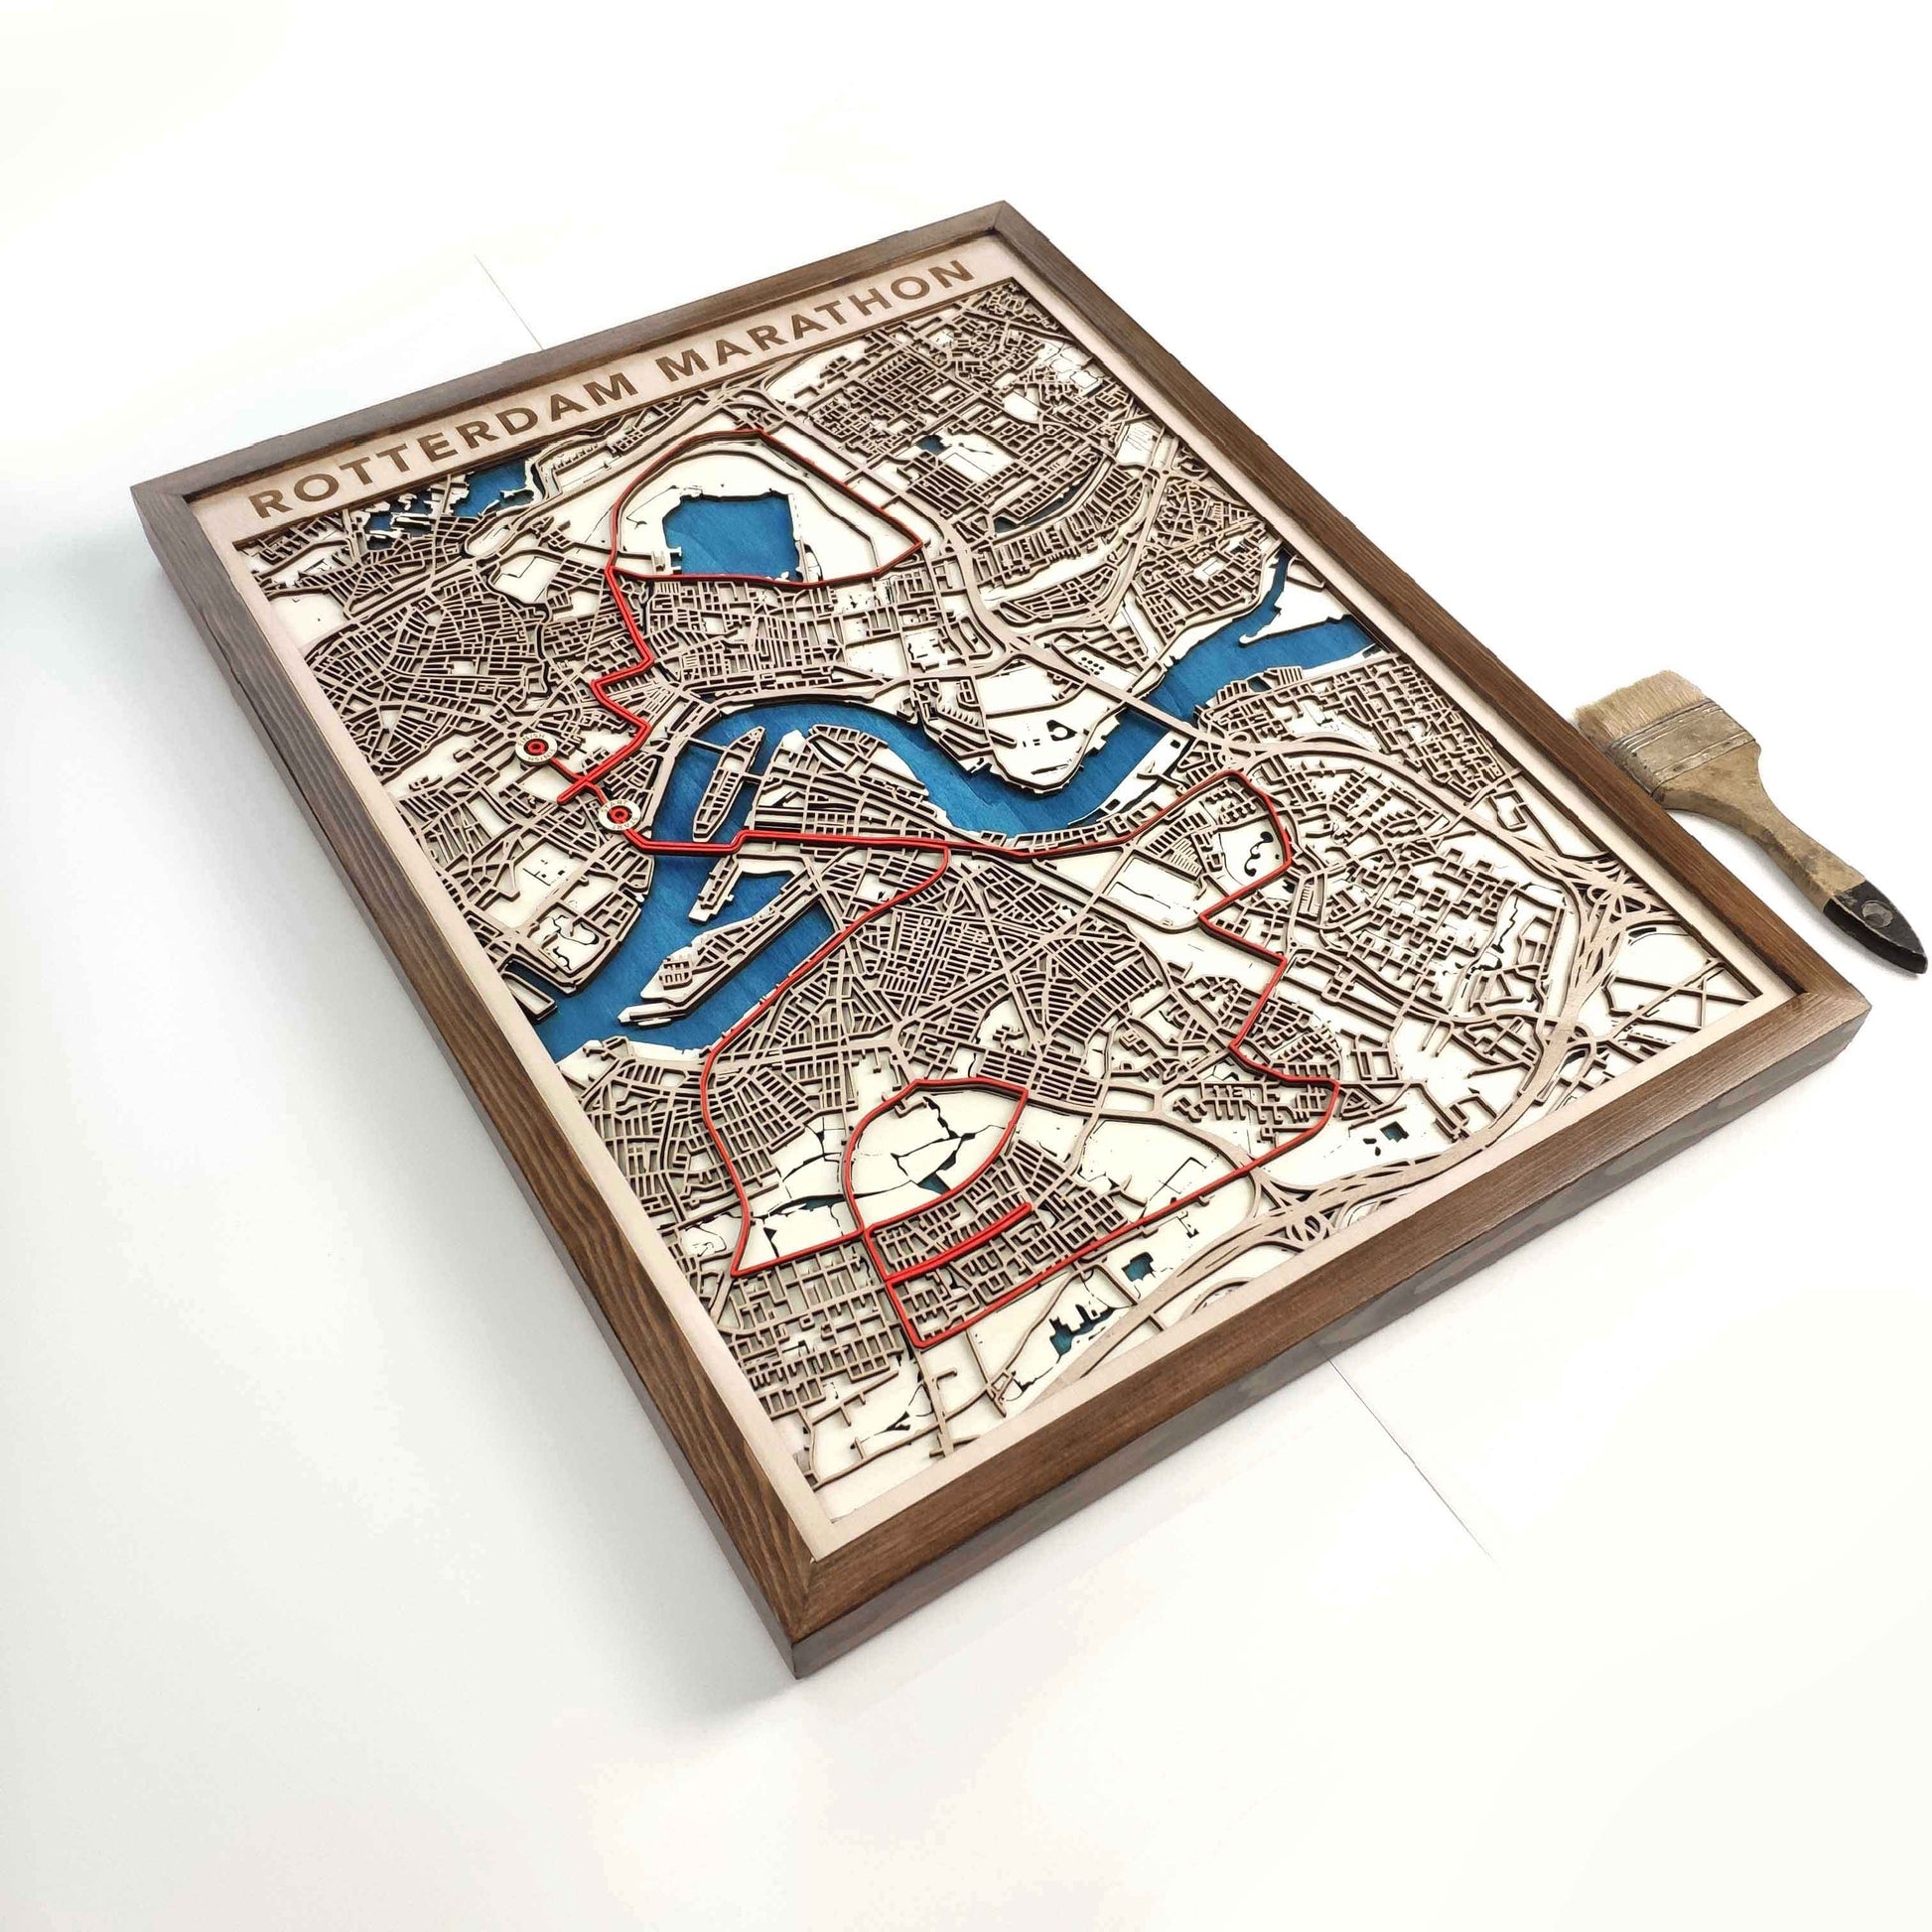 Rotterdam Marathon Laser-Cut Wooden Map – Unique Runner Poster Gift by CityWood - Custom Wood Map Art - Unique Laser Cut Engraved - Anniversary Gift